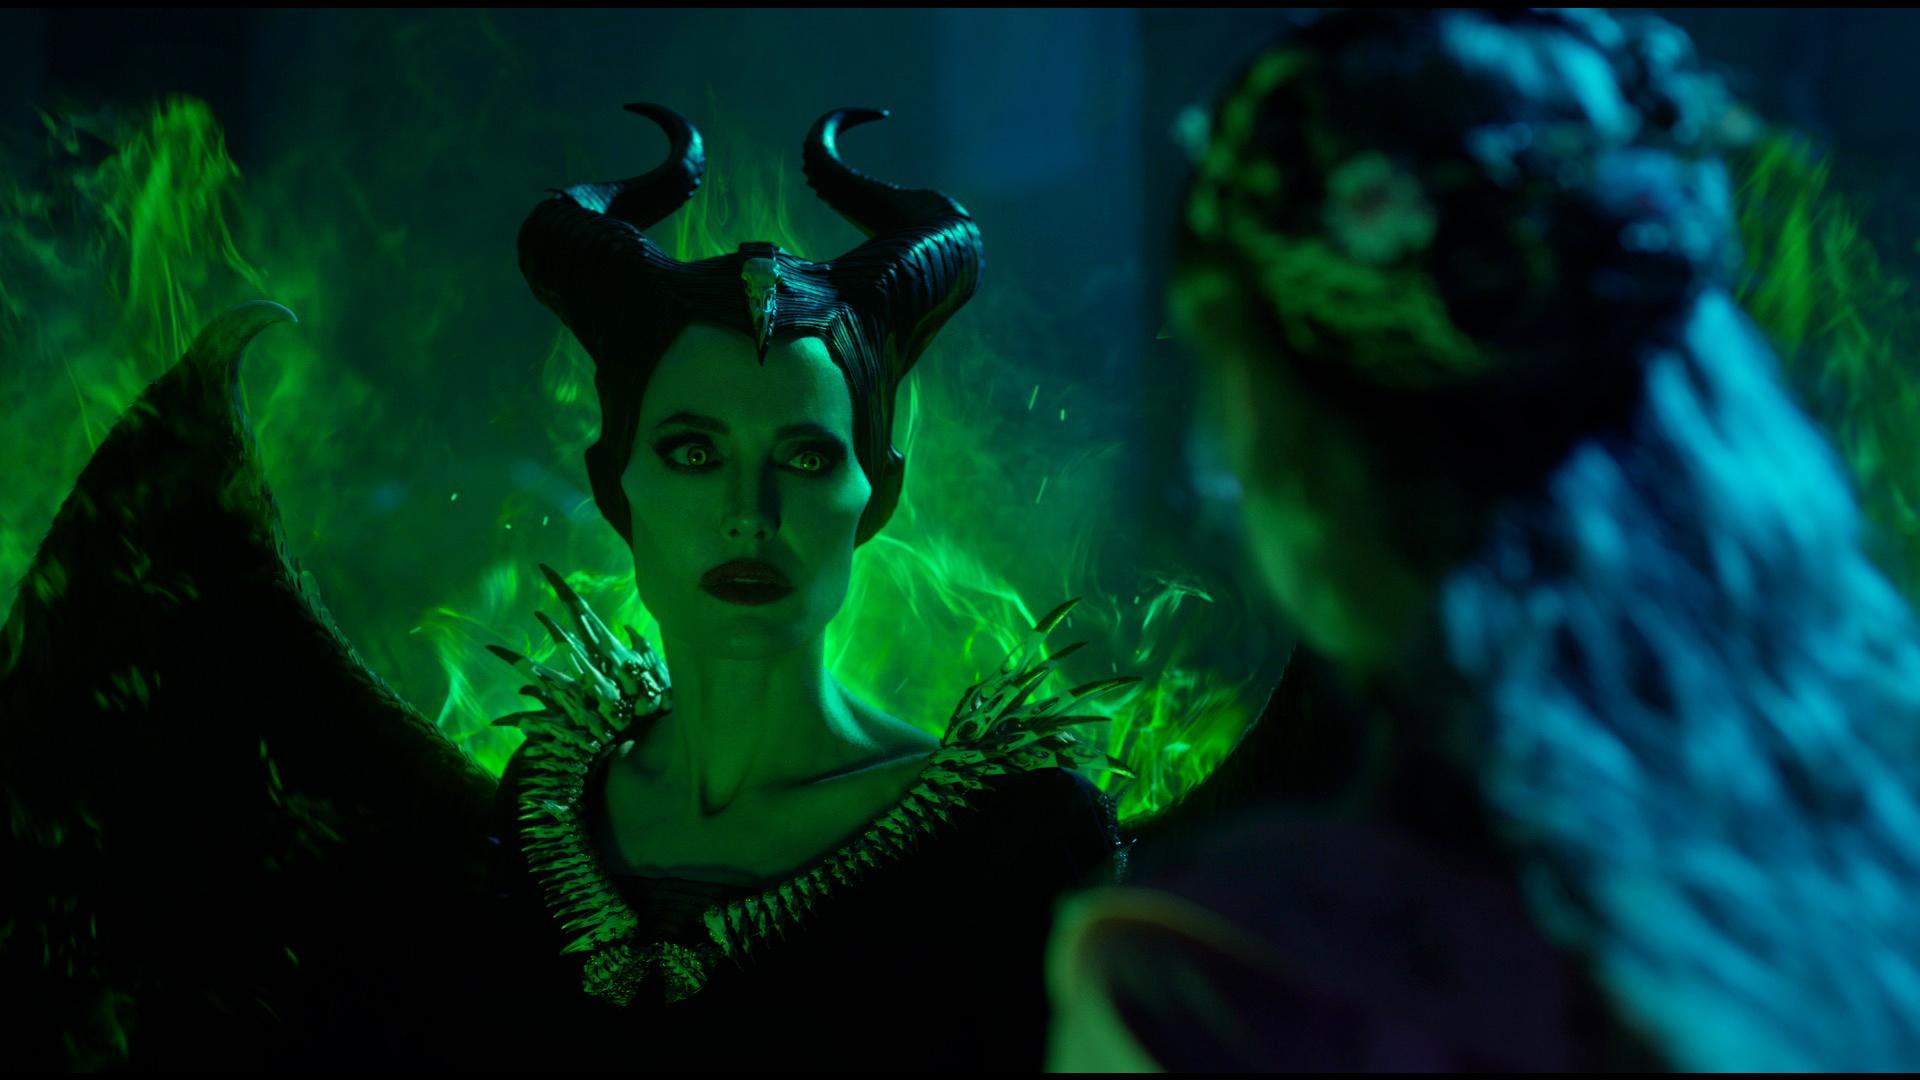 Maleficent 2 Brings Back Angelina Jolie as the Mistress